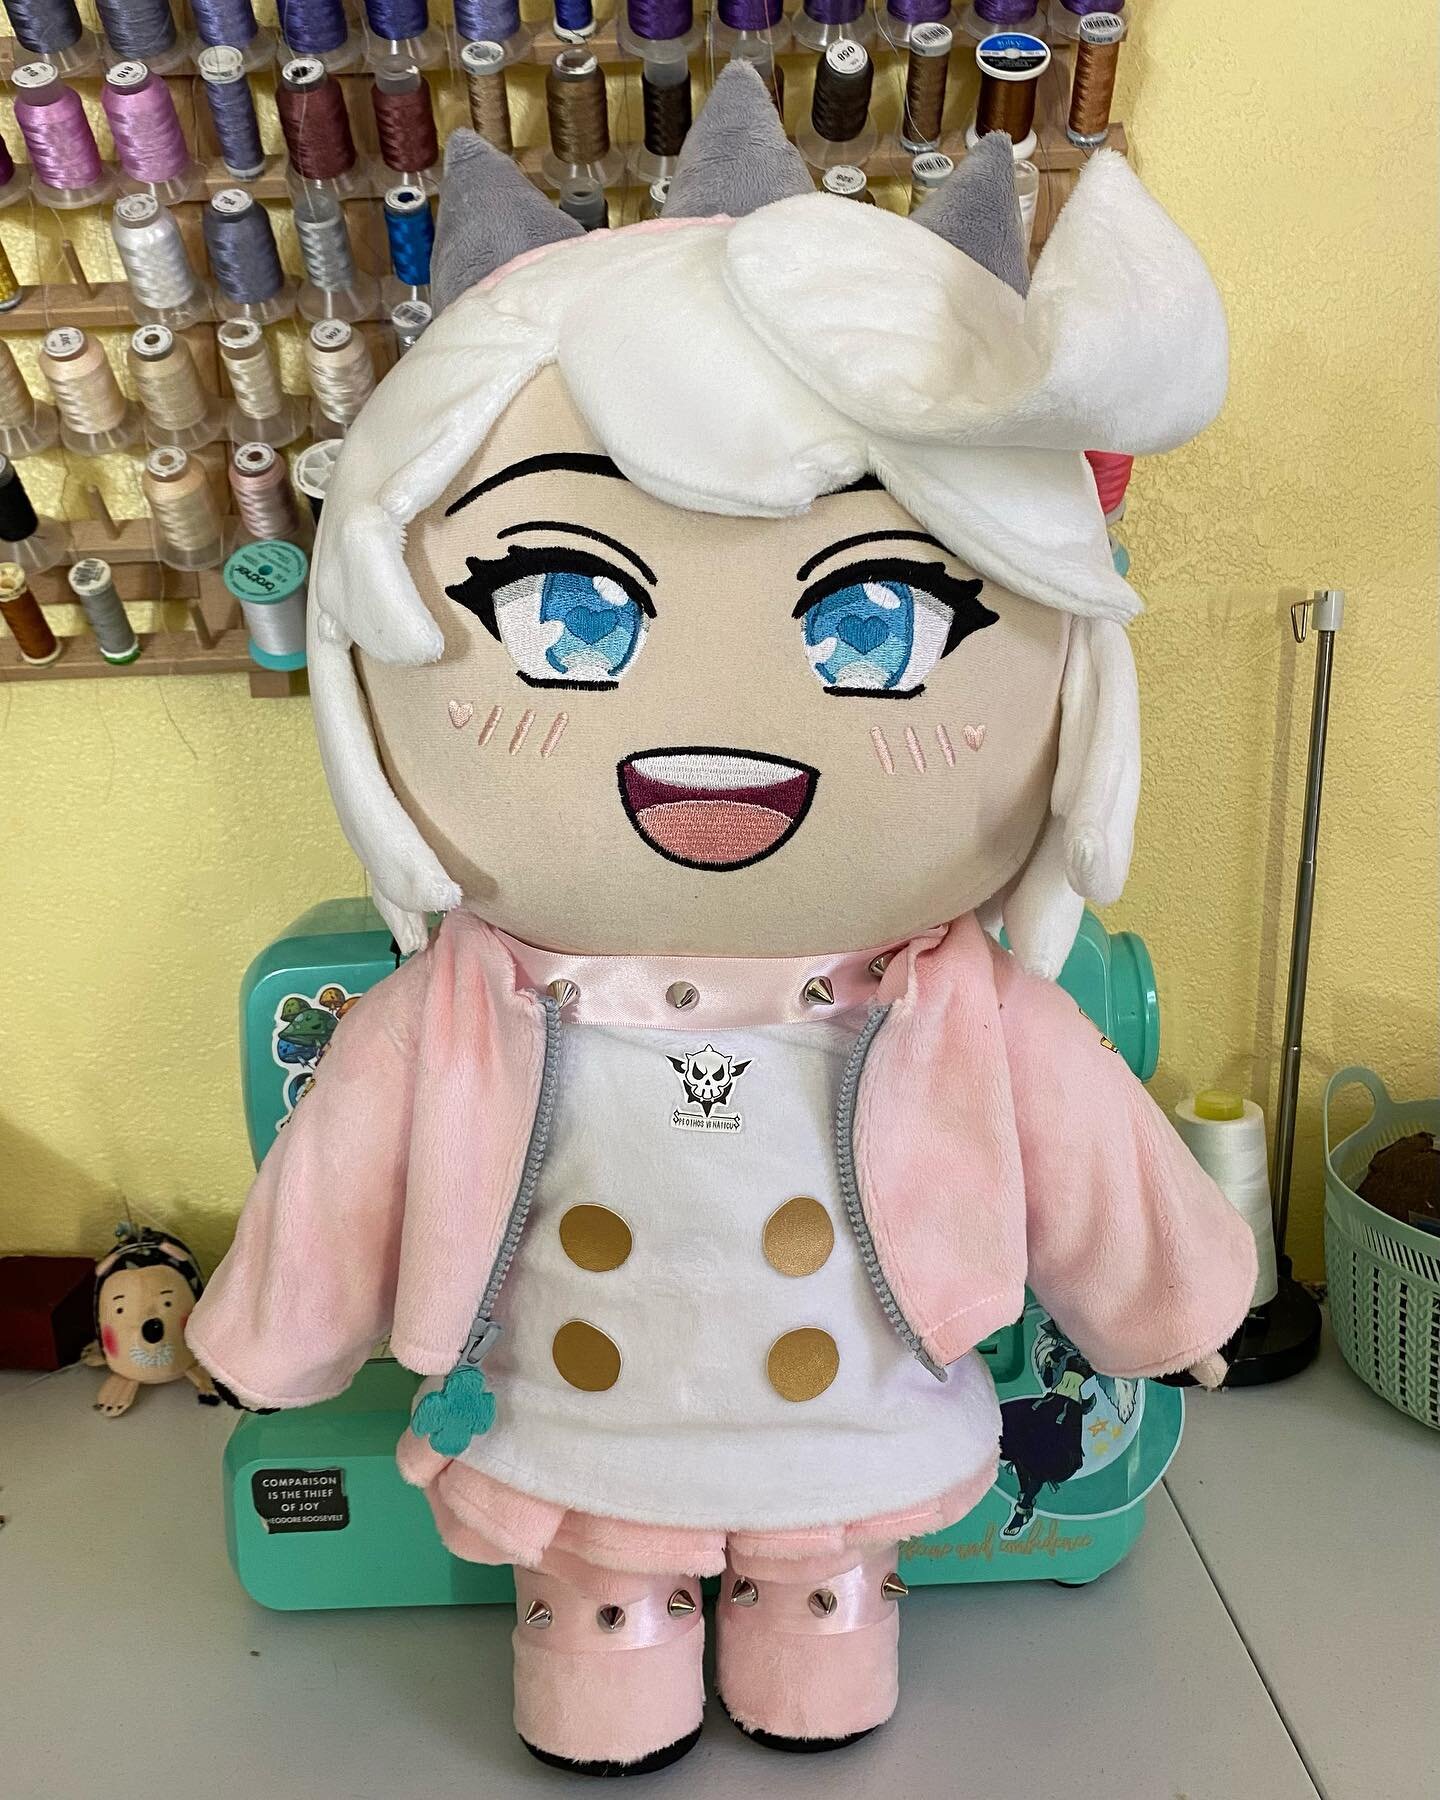 Biiig elphelt plush done~ she&rsquo;ll be writing songs at my booth at Frosty Faustings :3 

Attached is a video of her voice clip 💕

#elpheltvalentine #elphelt #frostyfaustings #ggst #strive #plush